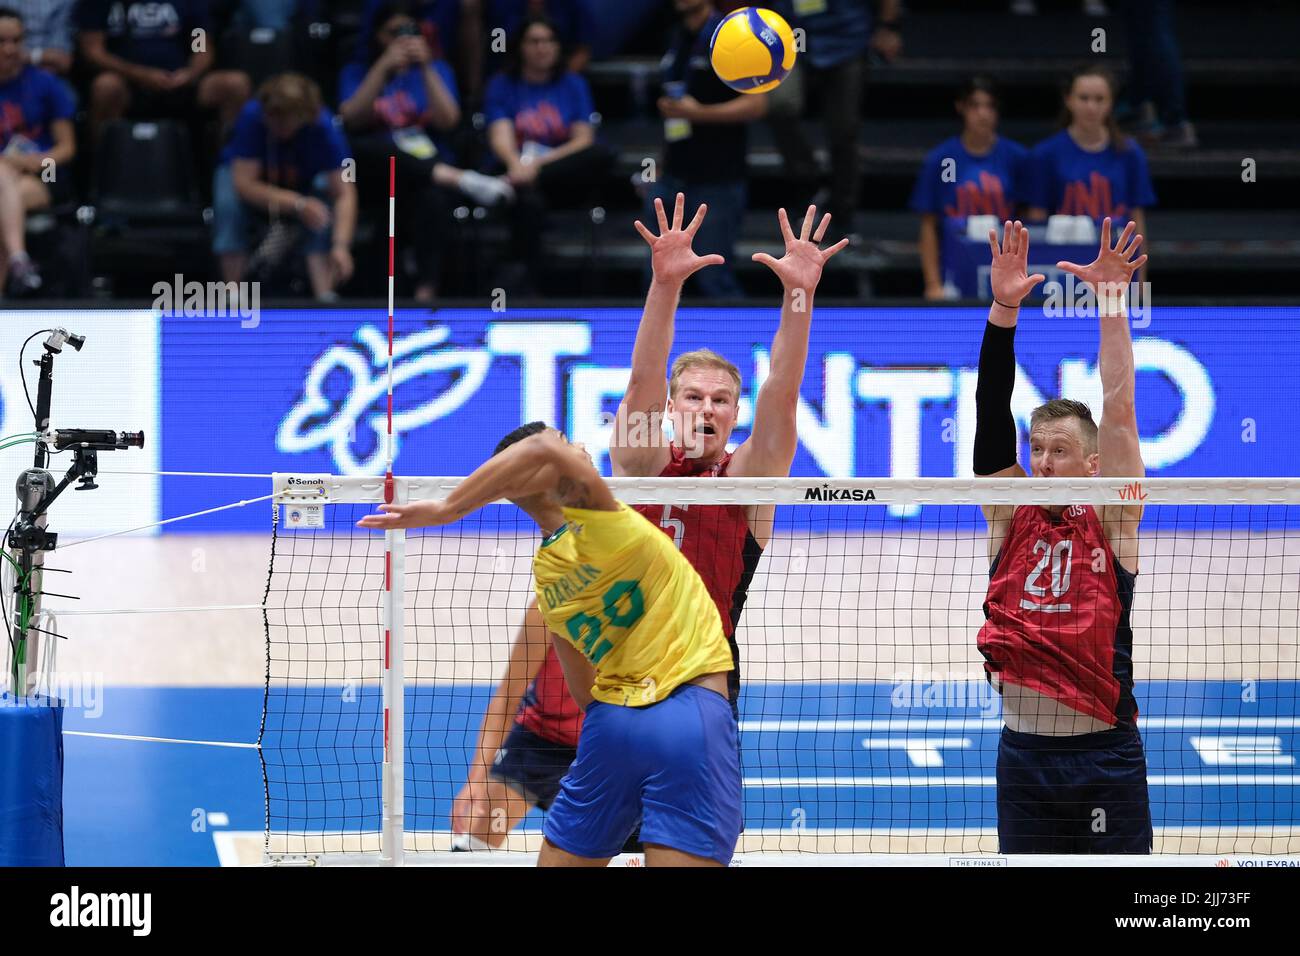 Bologna, Italy. 20th July 2022. Volley Nations League 2022 - Quarter finals match United States VS Brasil Stock Photo